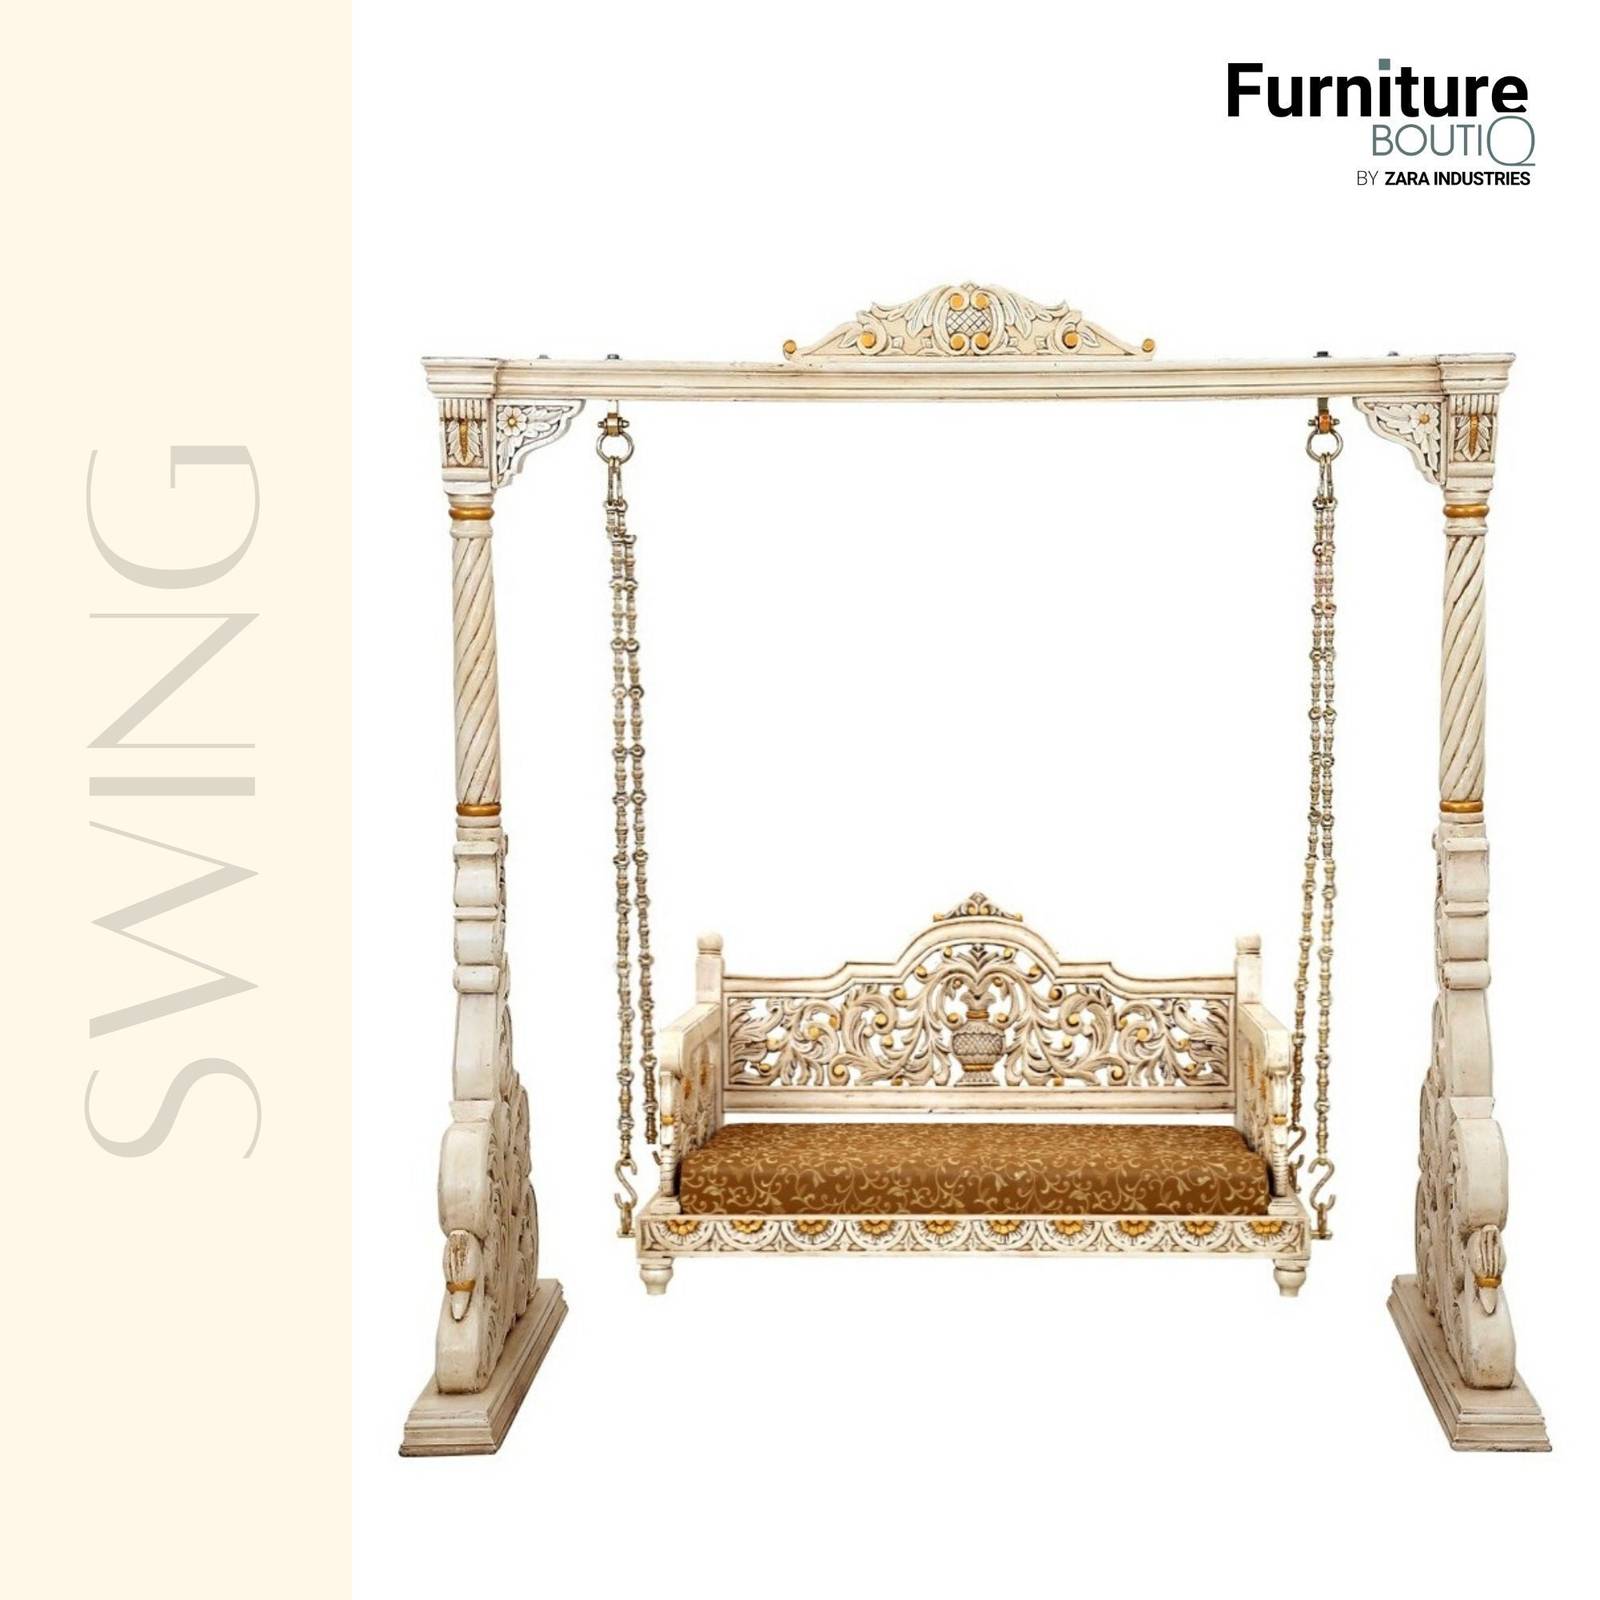 Primary image for Furniture BoutiQ Hand-carved Solid Wood Swing | Indian Wooden Jhula